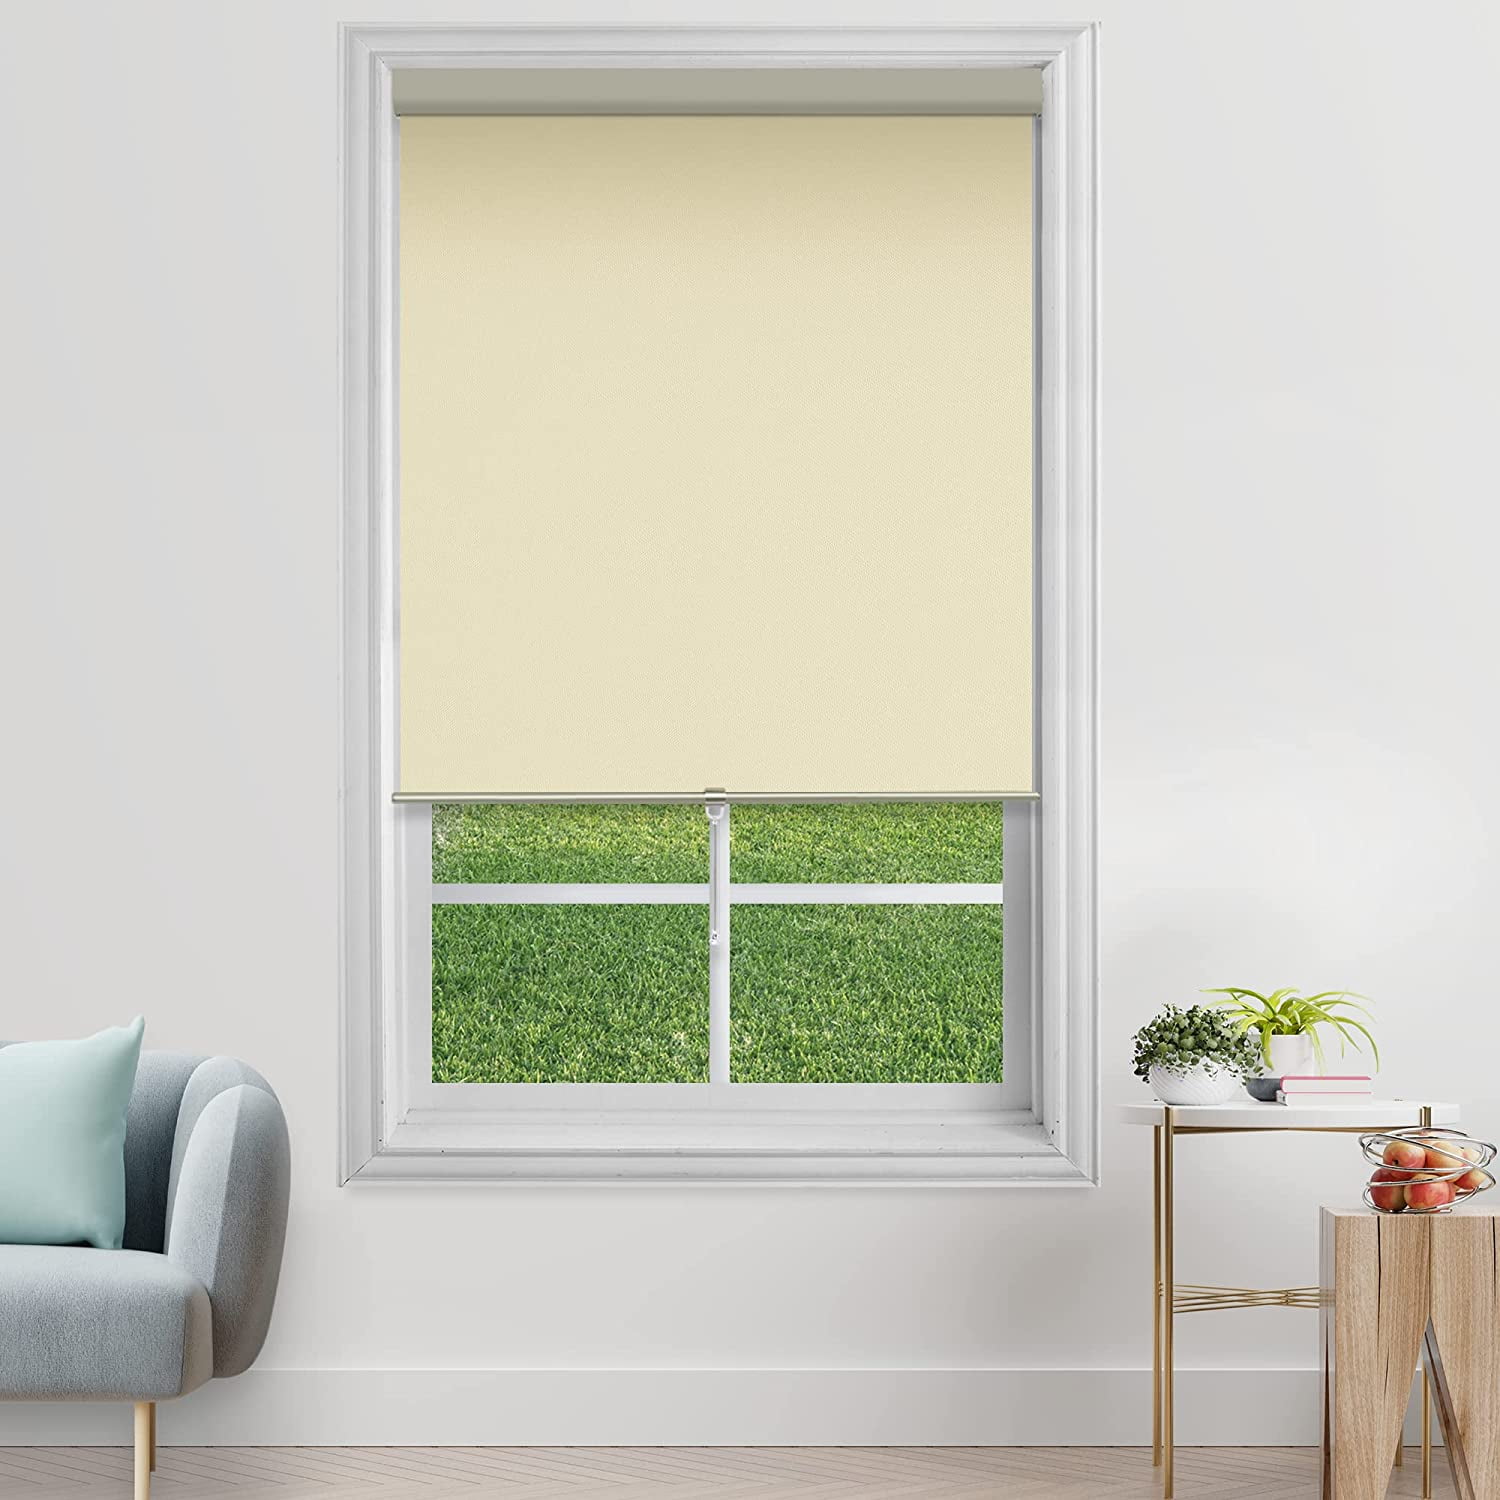 Chain Pull Roller Blind Side Pull Roller Blinds Door Window Blind Opaque Daylight 